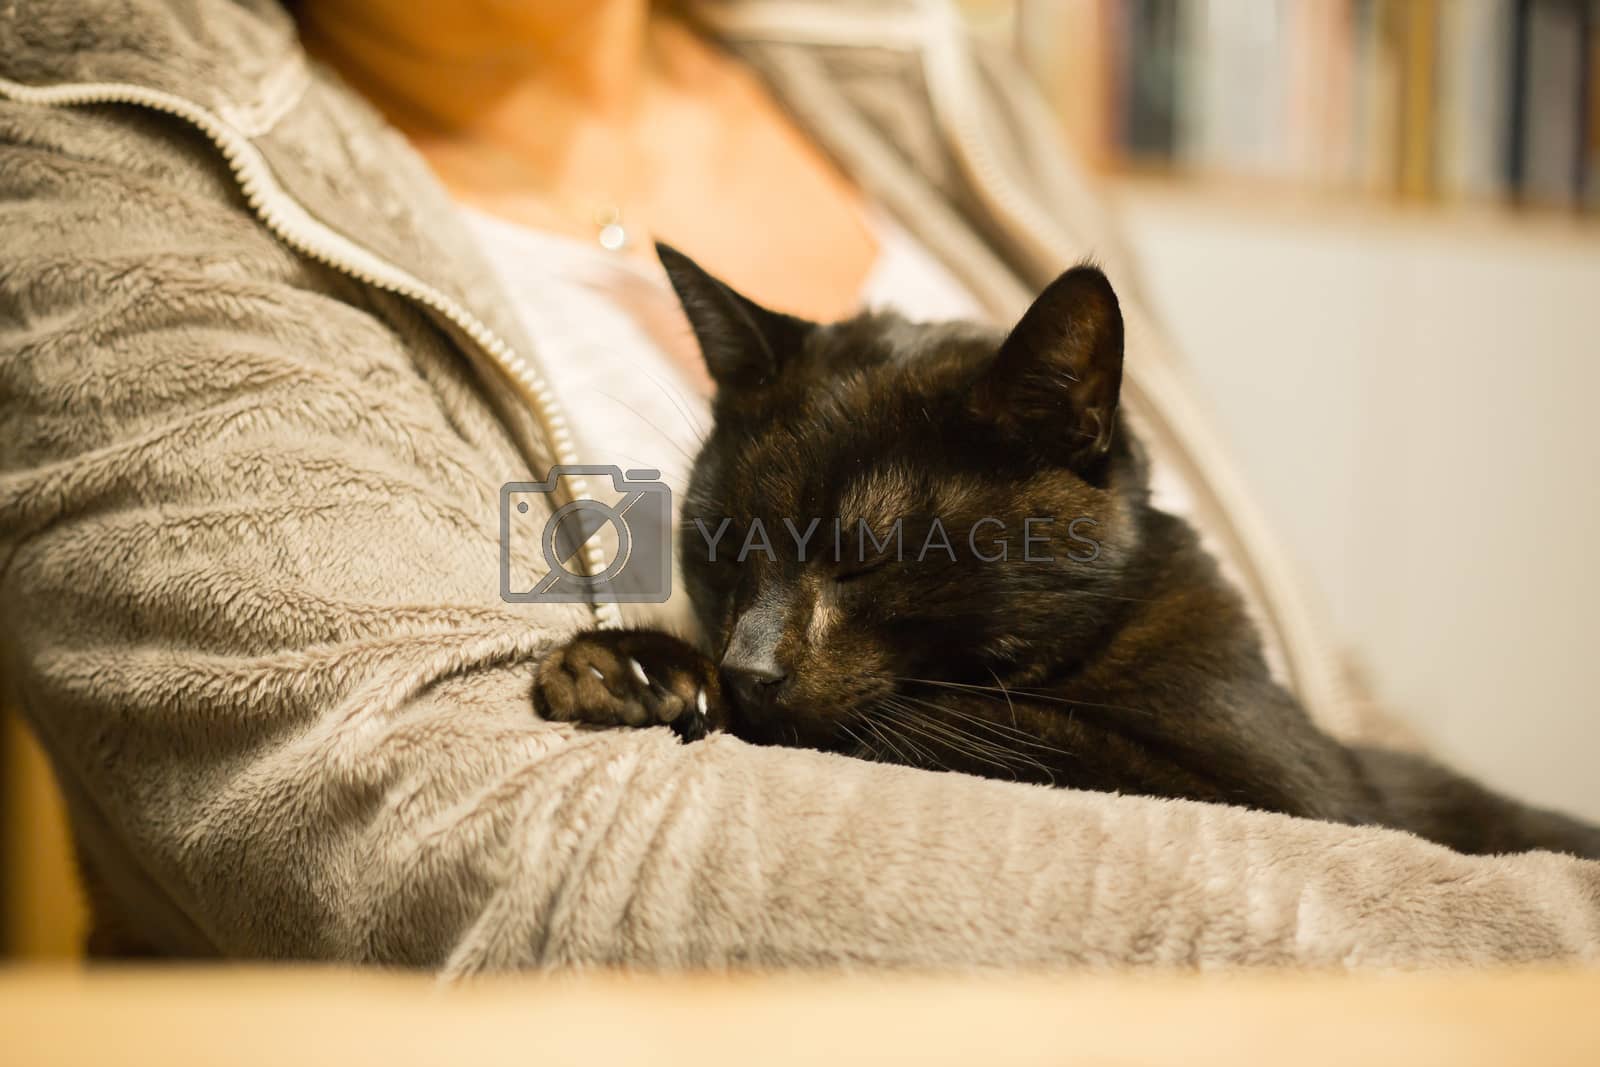 Royalty free image of Woman is holding relaxed cat in the arm by sandra_fotodesign